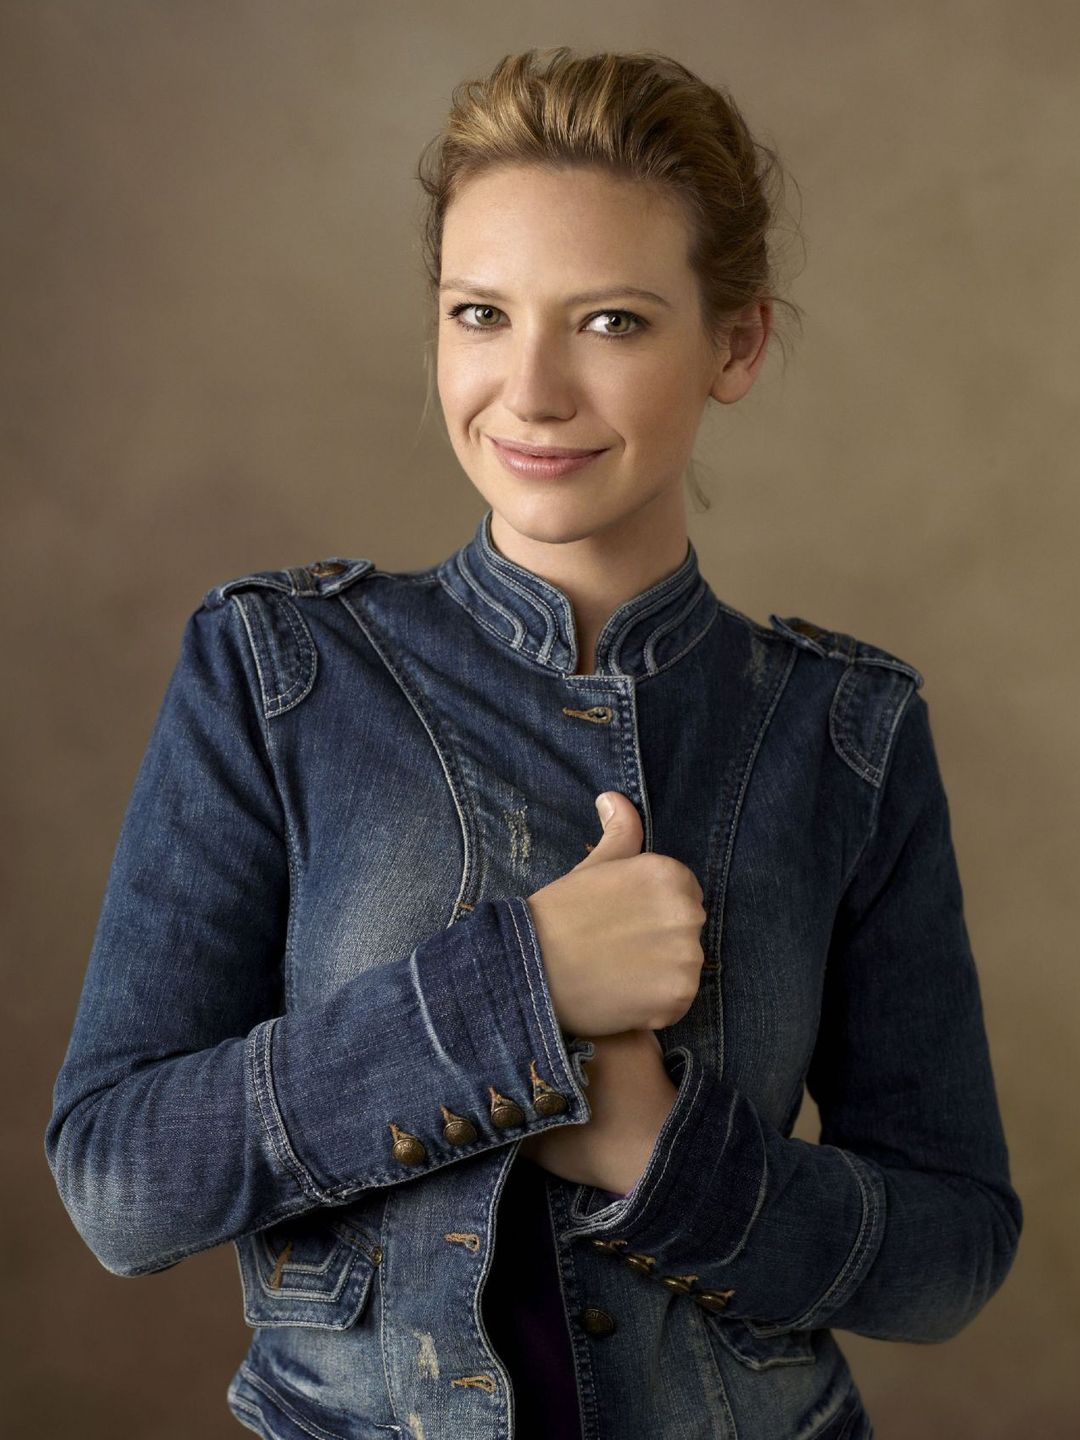 Anna Torv who is she